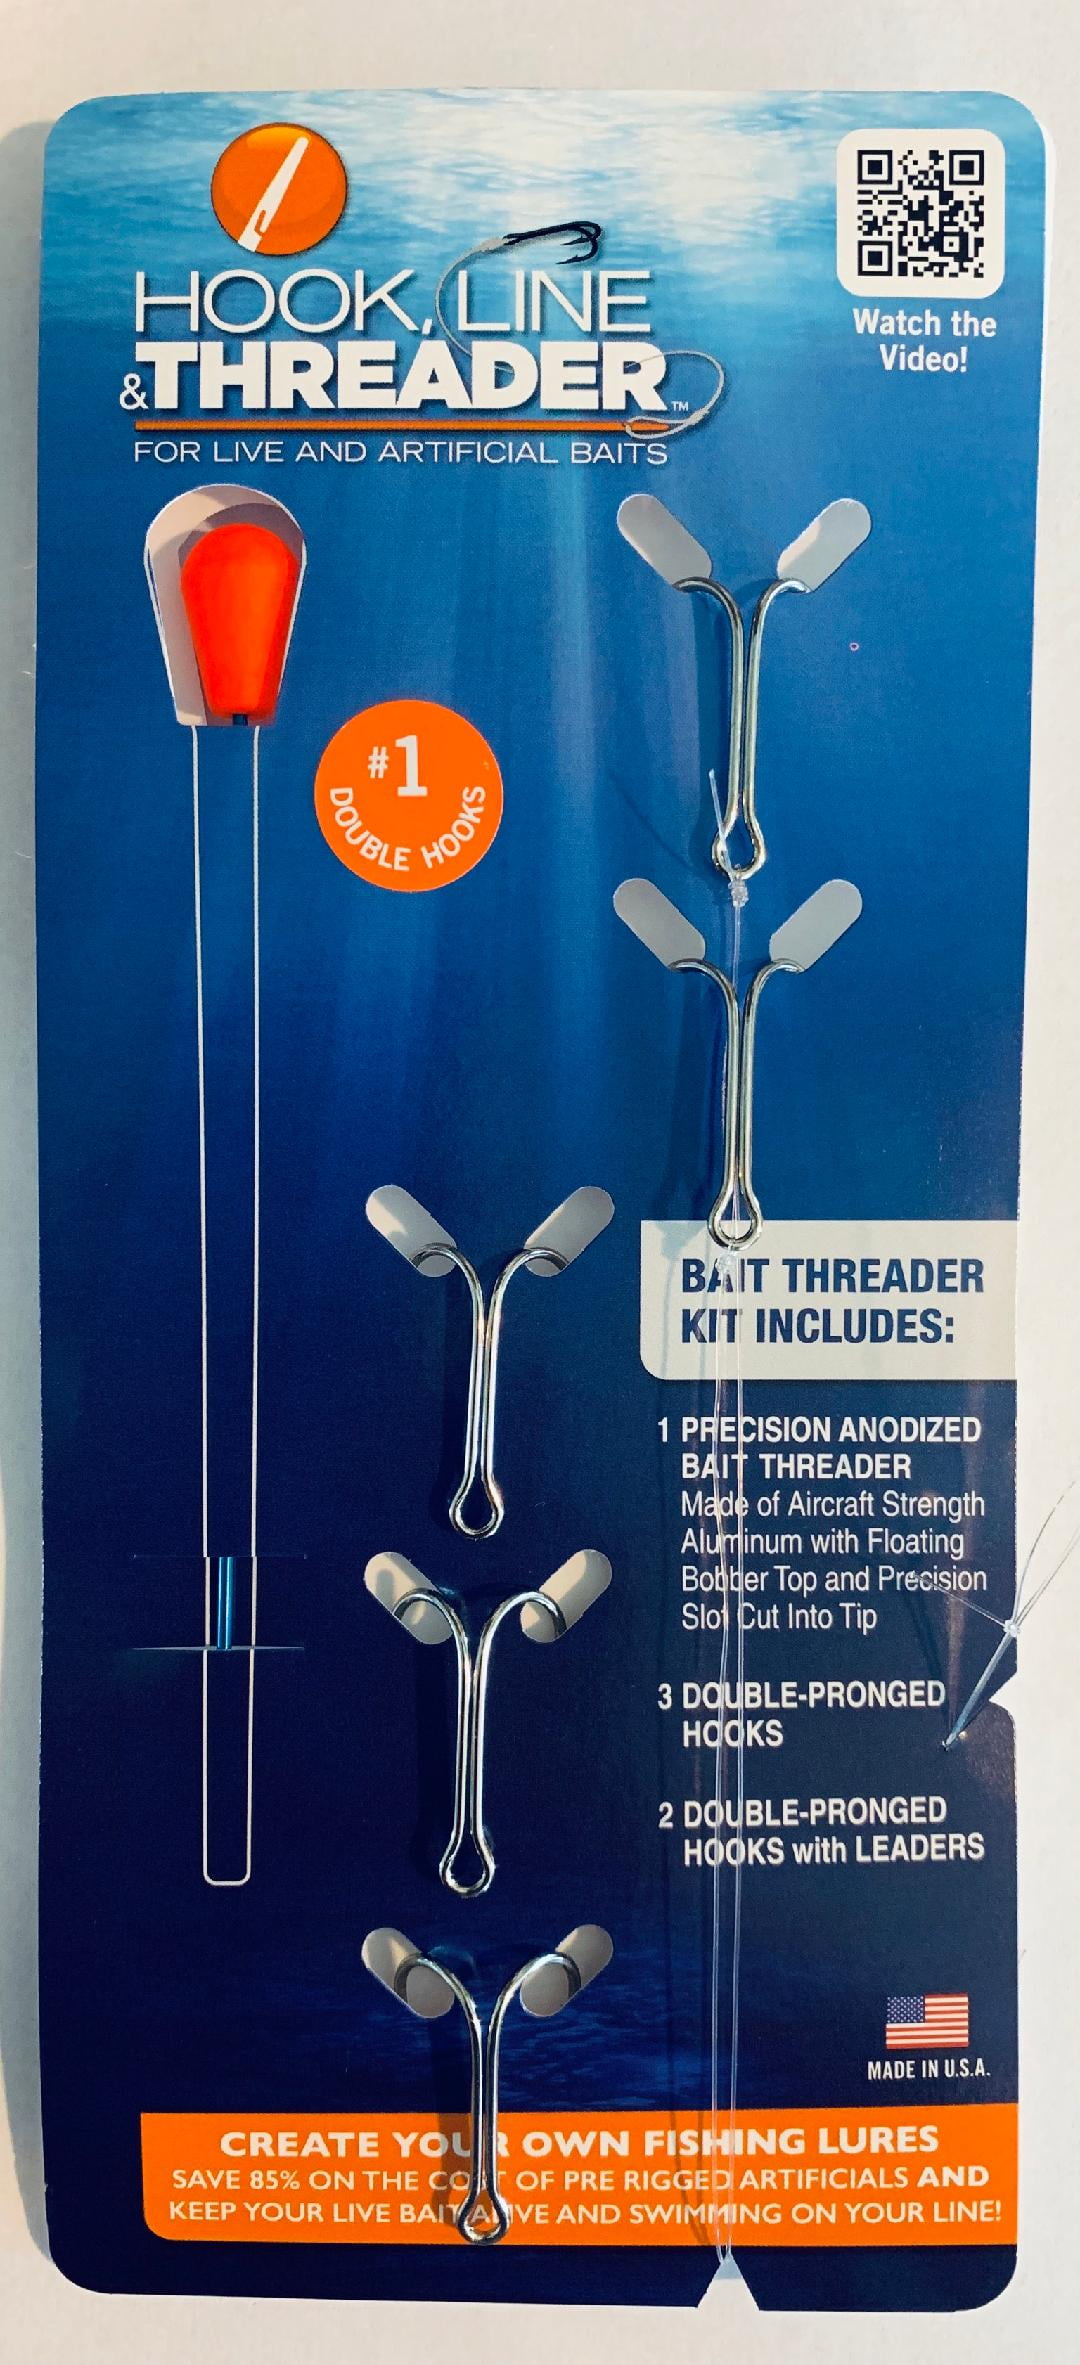 Complete Hook, Line & Threader Kits. Choose from 7 Different Hook Sizes 